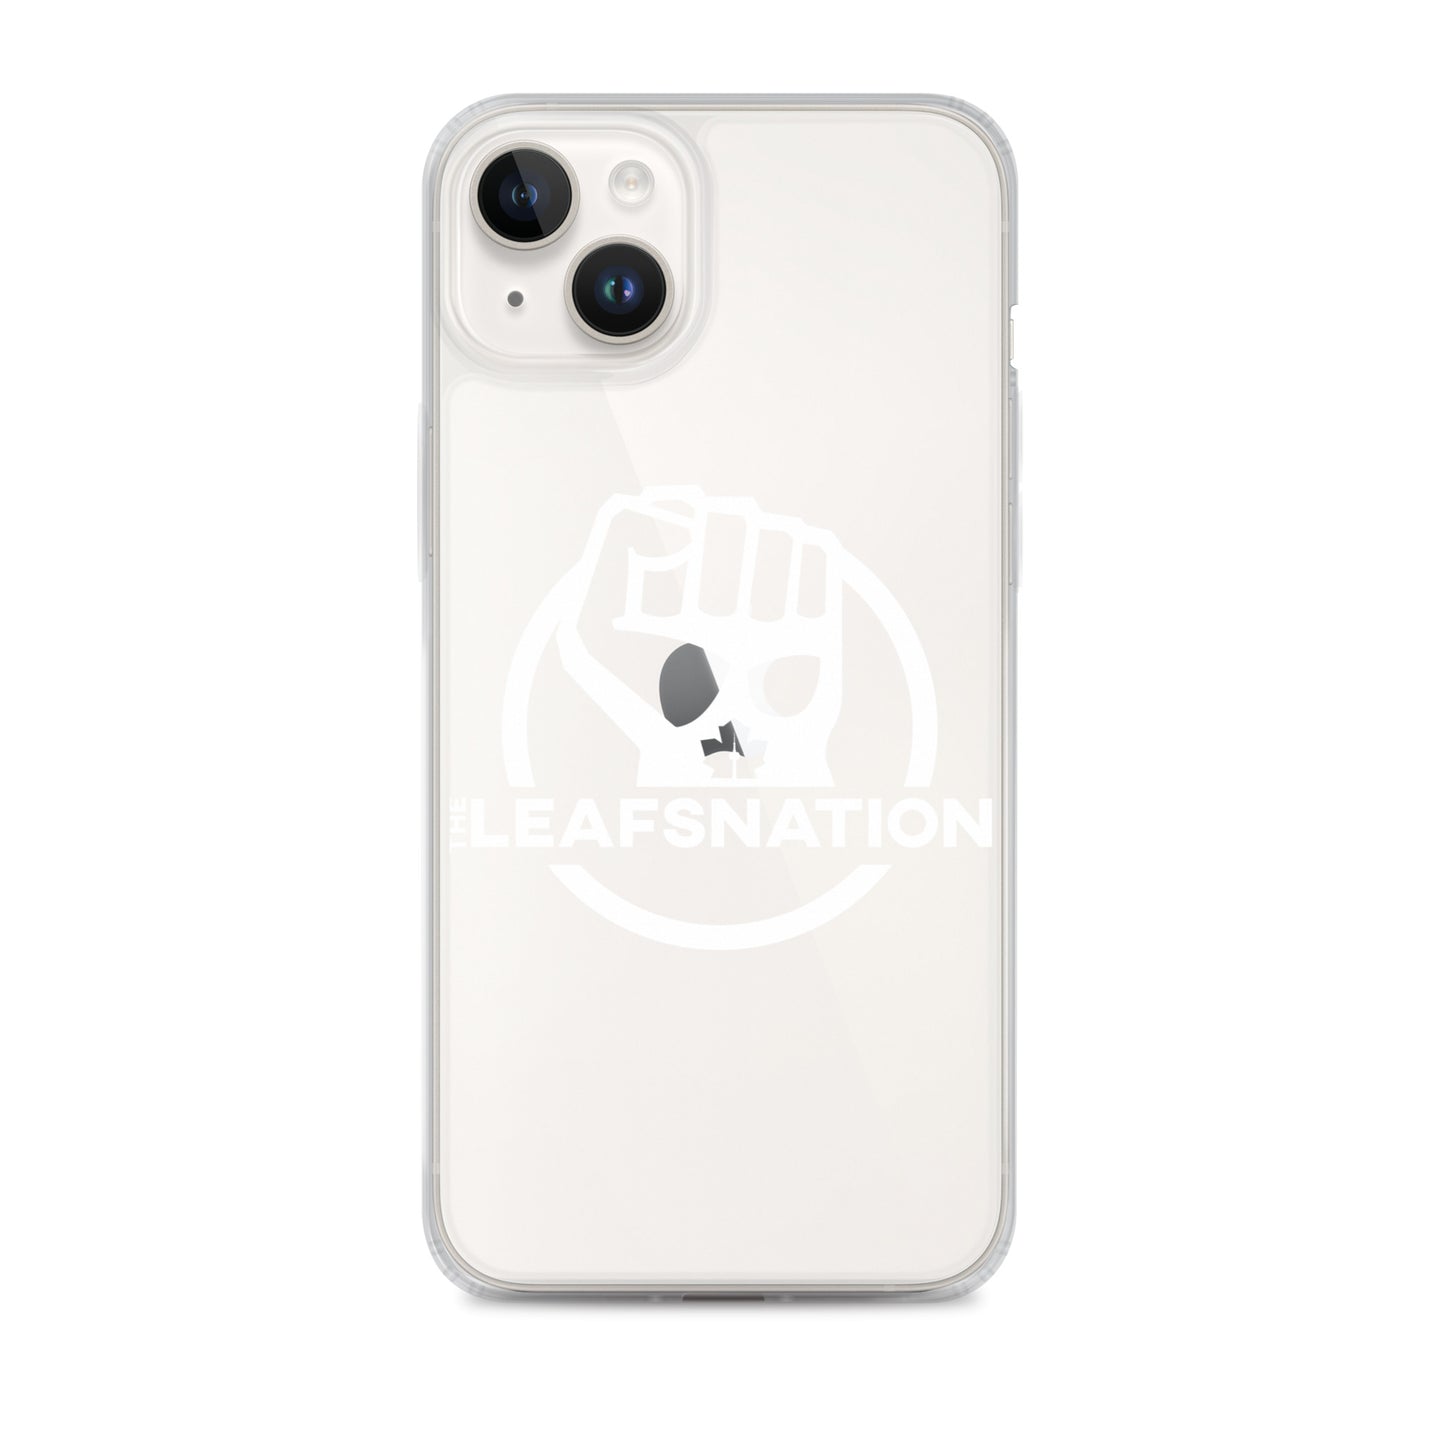 Leafsnation - Clear Case for iPhone® White Logo